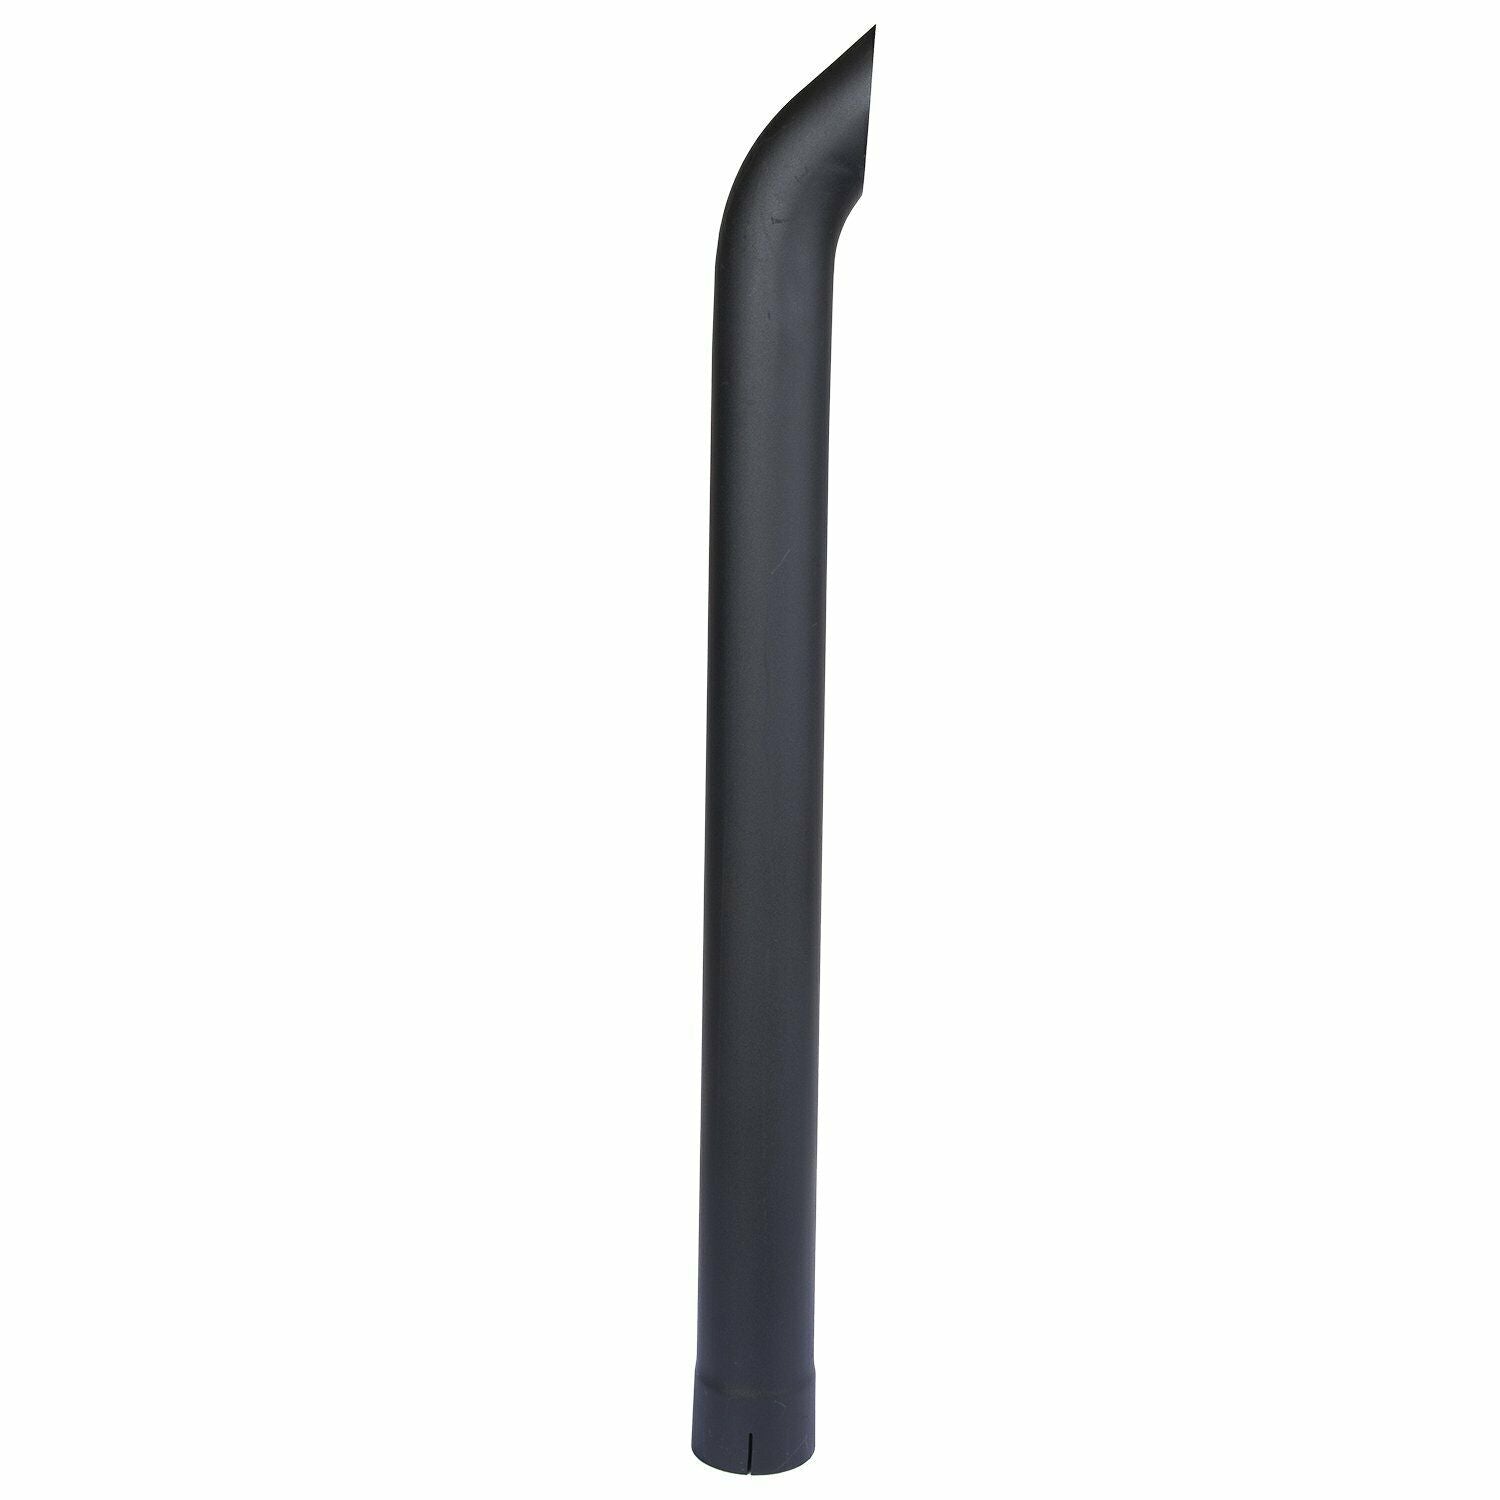 Exhaust Stack Pipe   4" x 48" Curved Black